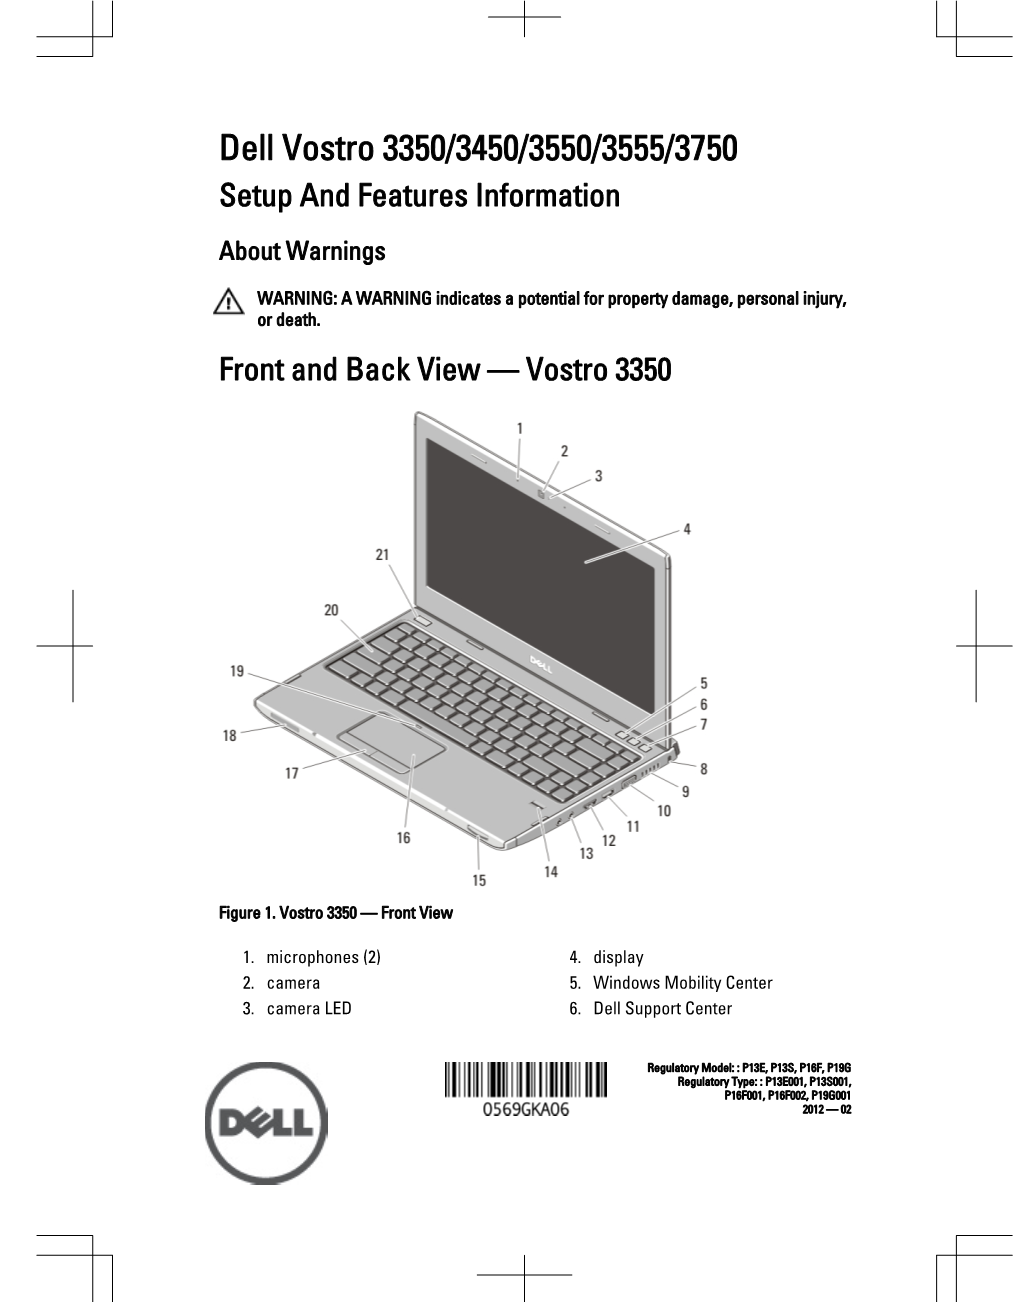 Vostro 3550 Setup and Features Information Tech Sheet